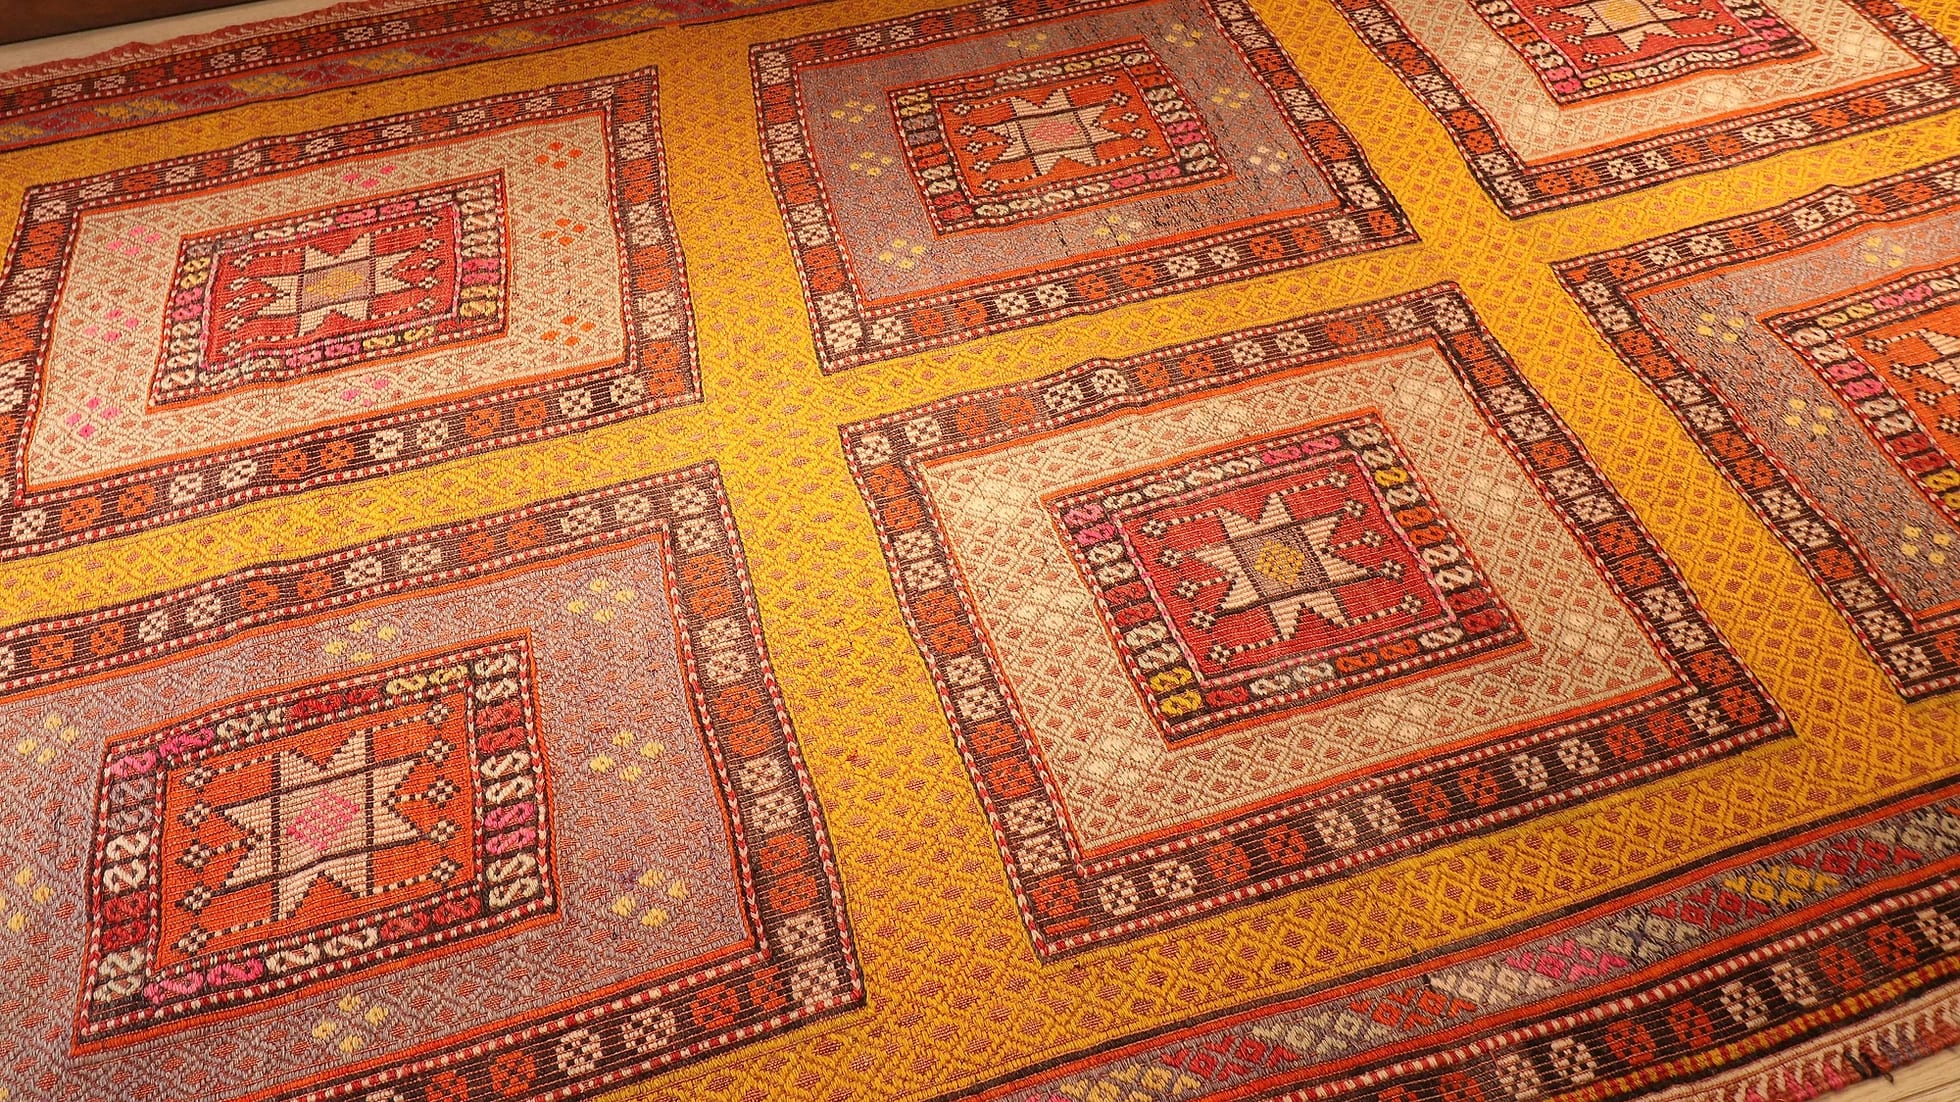 Embroidered Semi-Antique Mid-Century Fethiye Cecim Rug in Saffron in detail